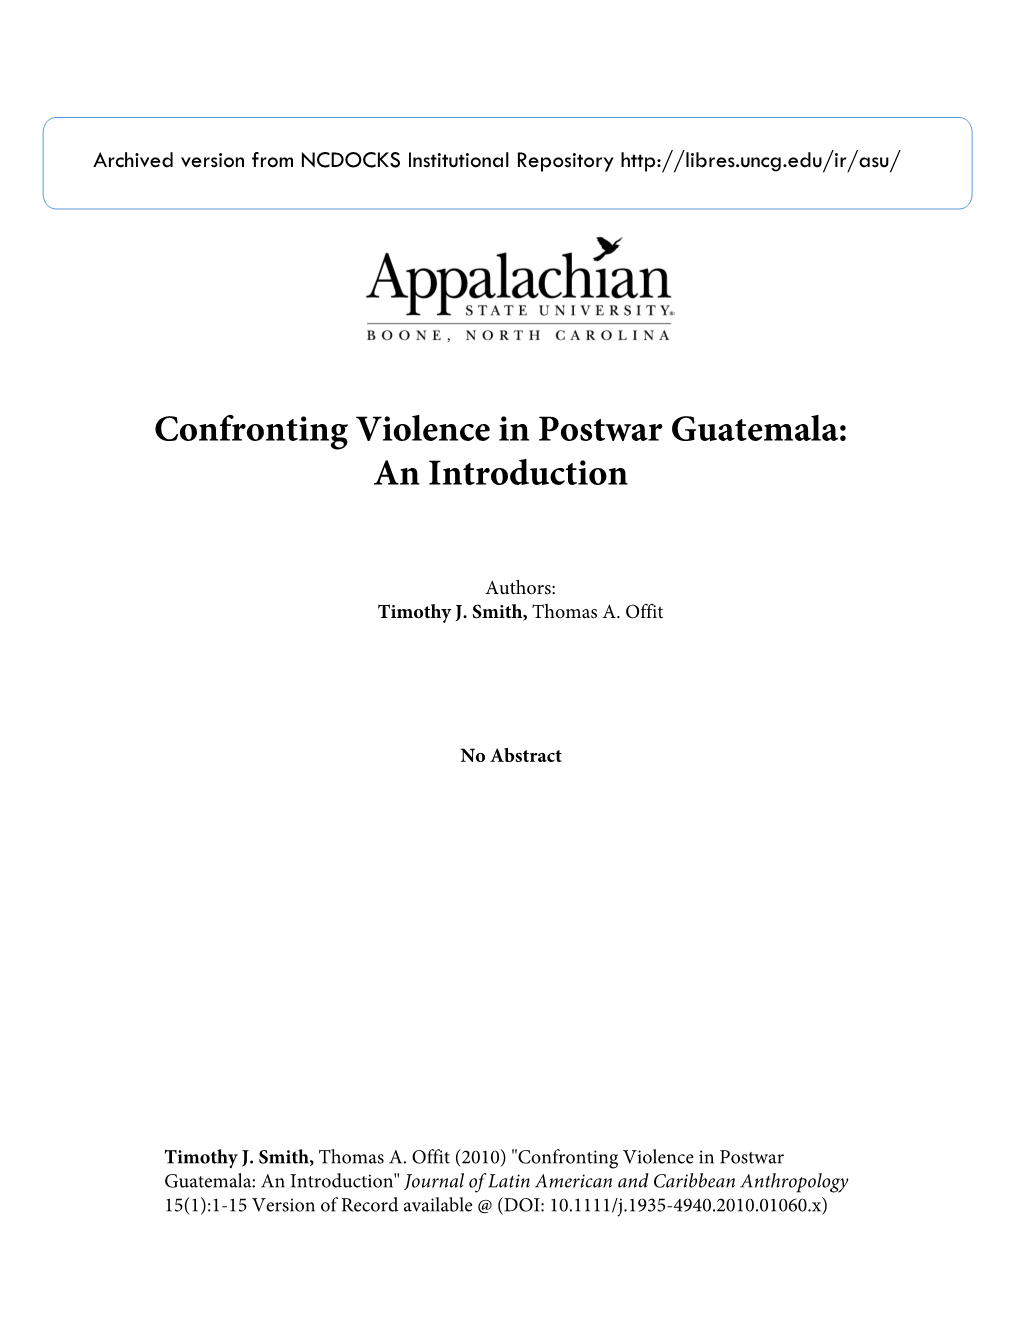 Confronting Violence in Postwar Guatemala: an Introduction